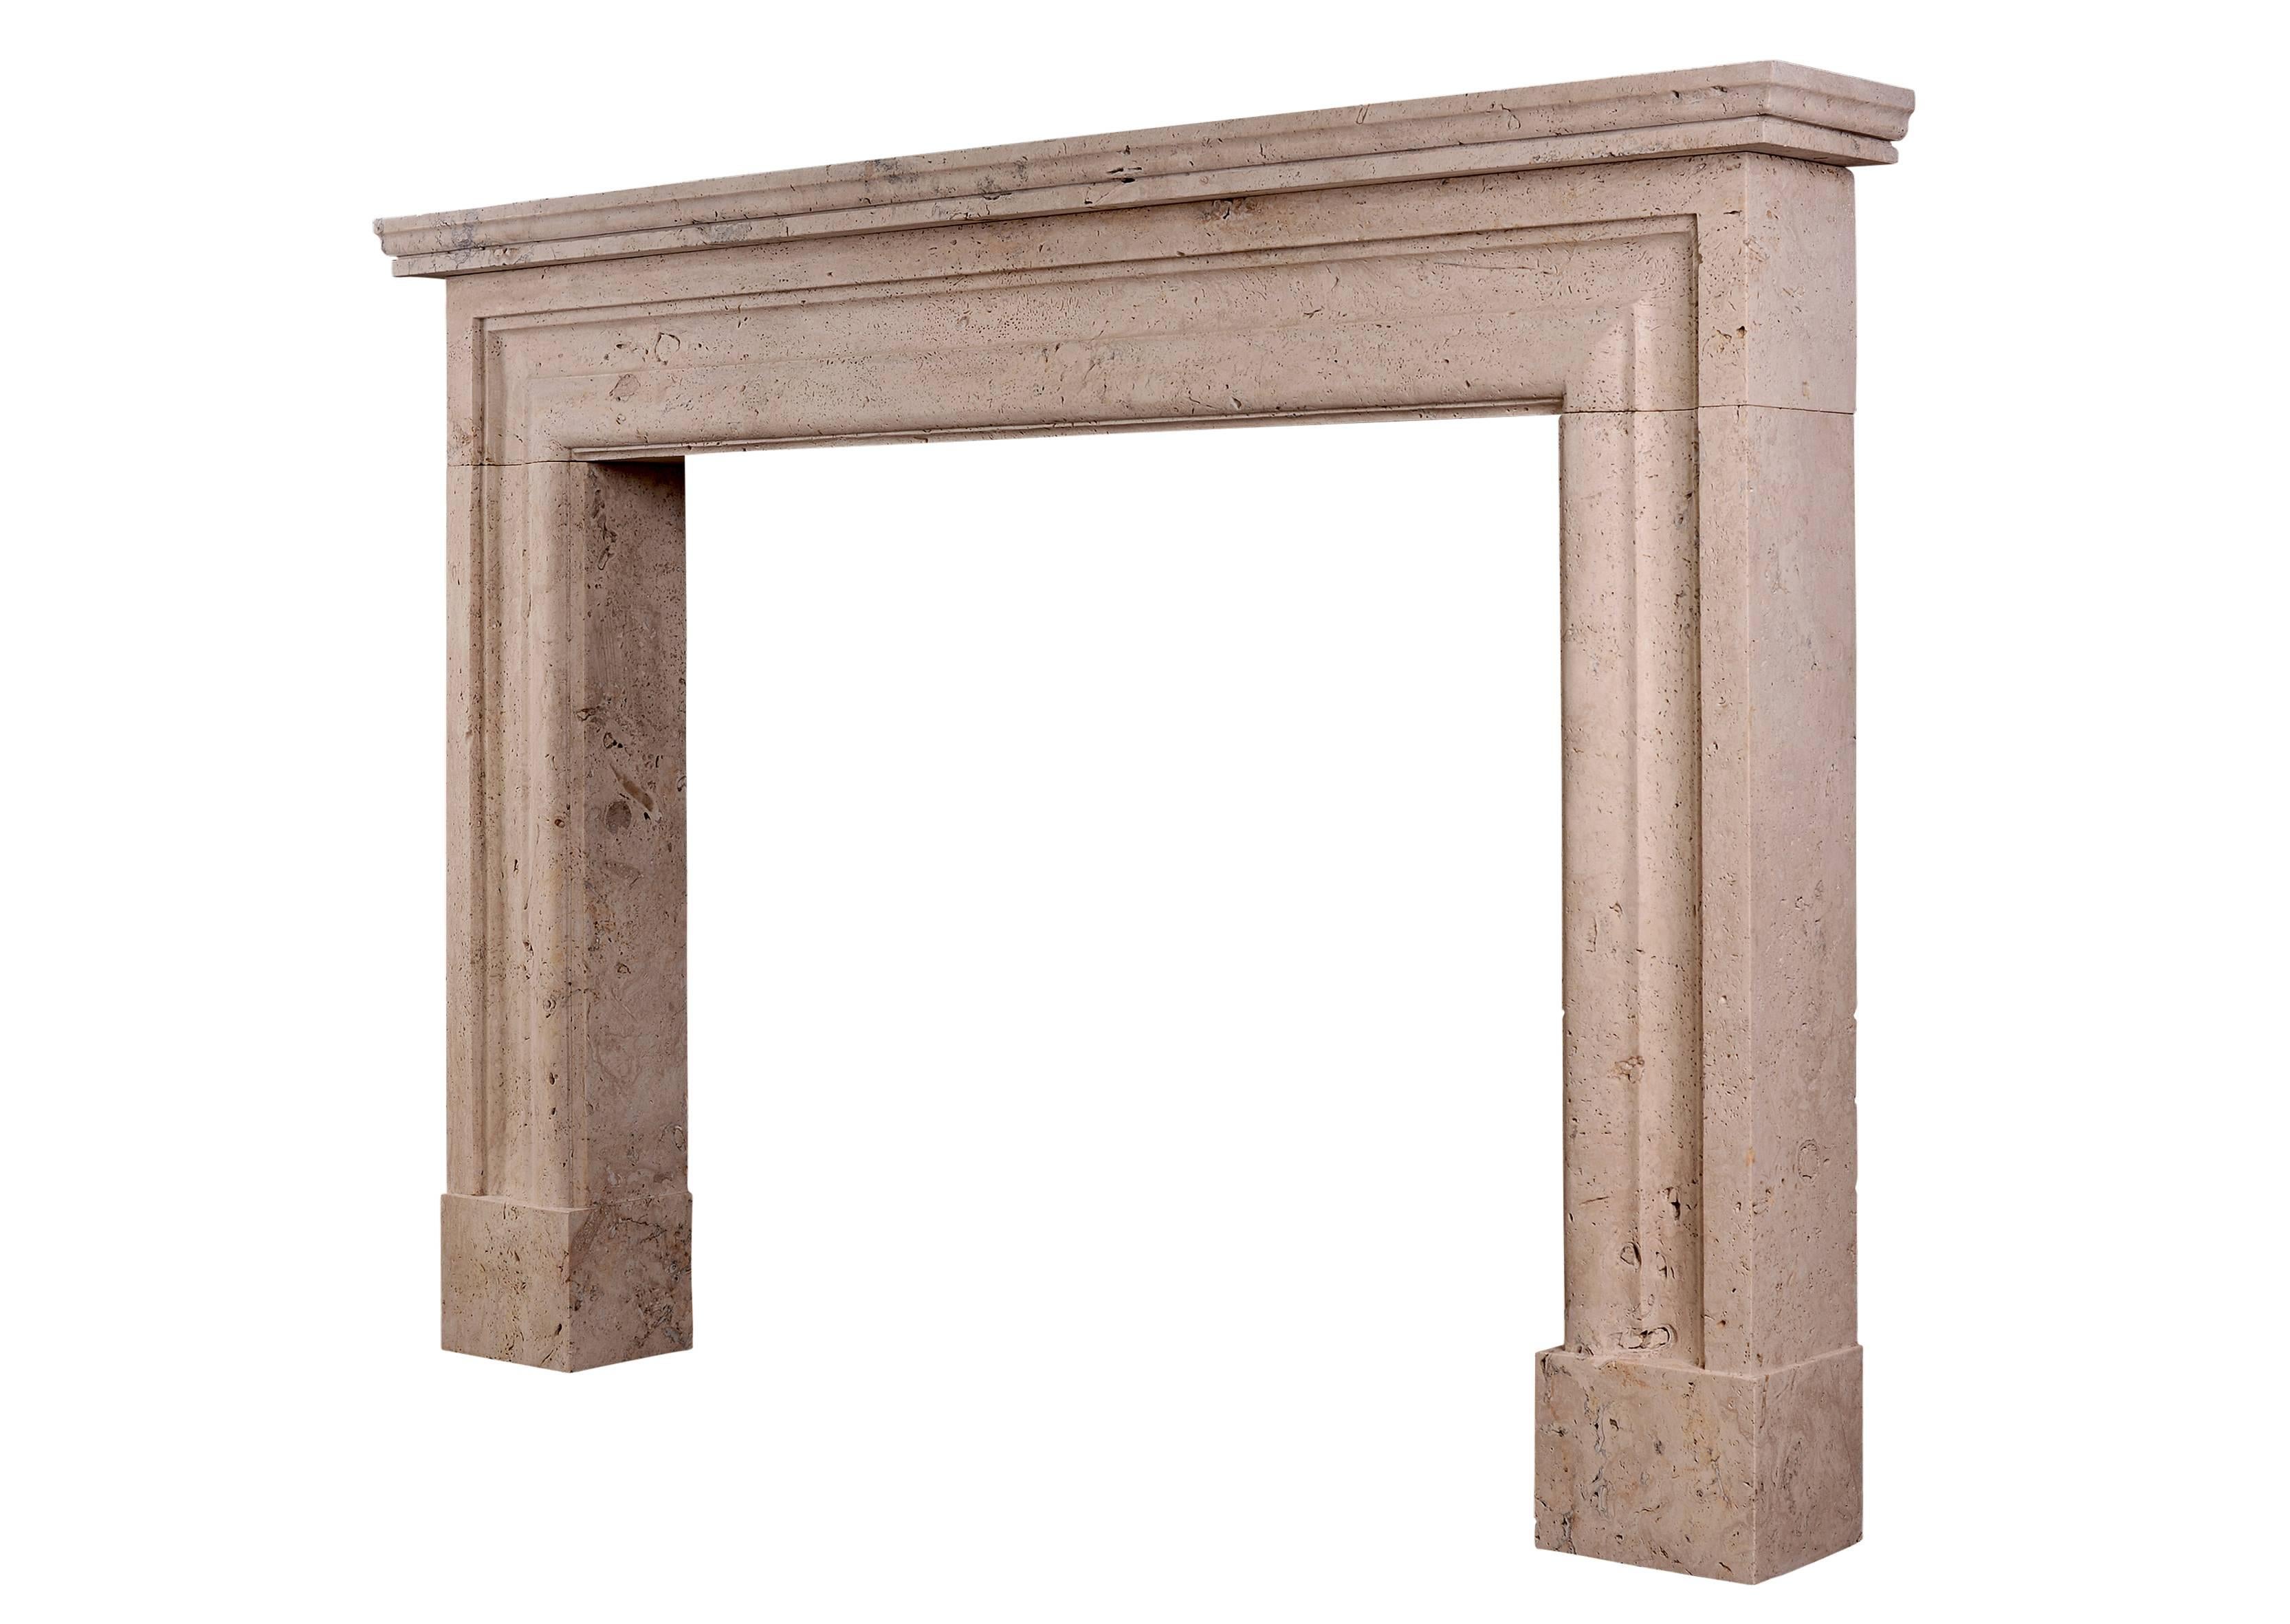 A large and imposing English molded bolection fireplace in white travertine stone. Modeled on a chimneypiece originally housed in the officer's mess at Chelsea Barracks, London. Can me made to any size in various materials.

Measures: 
Shelf